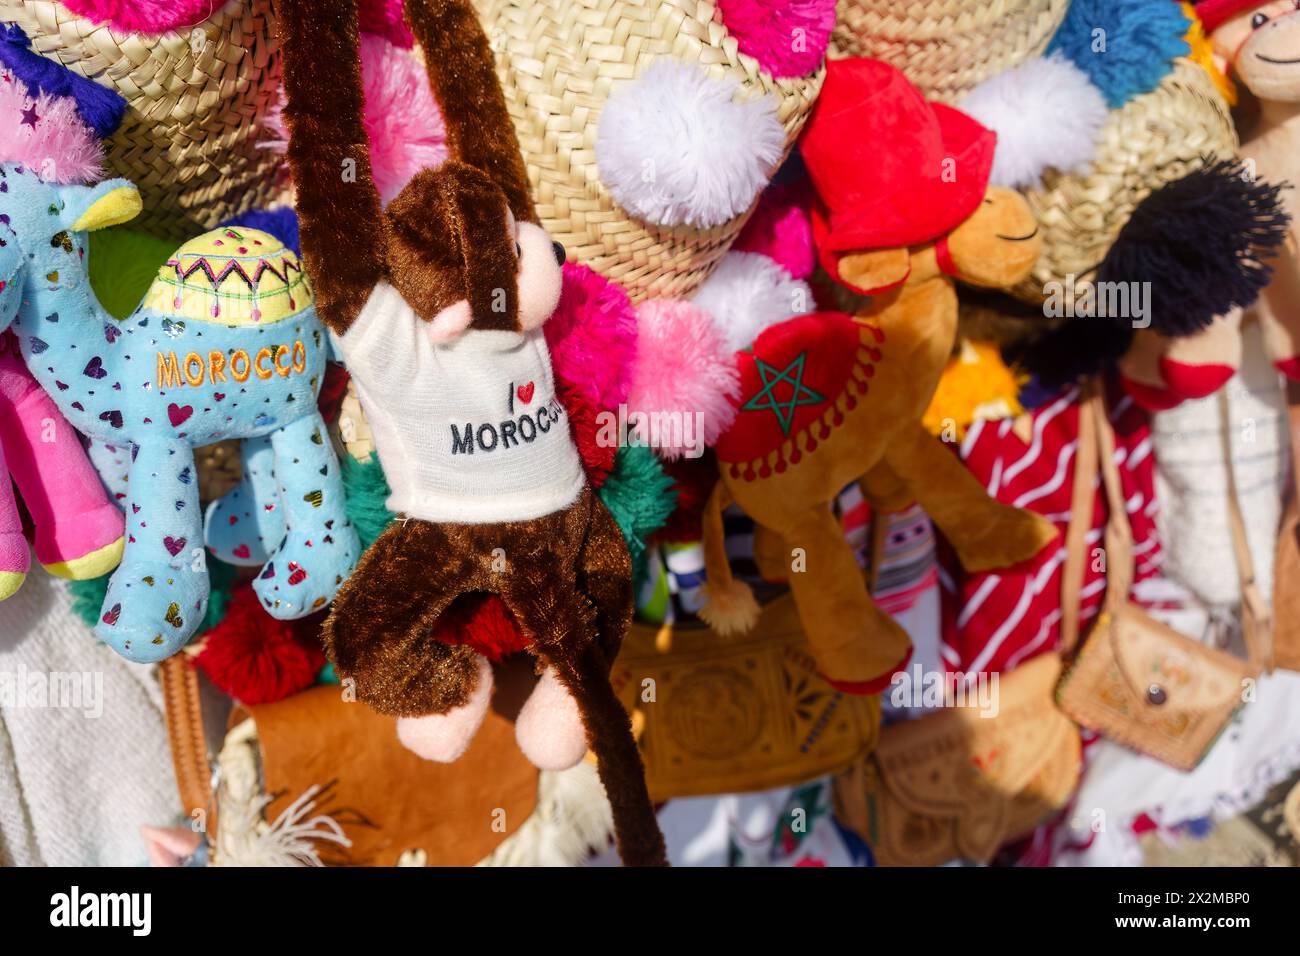 Close-up of Morocco-themed stuffed animals for sale. Stock Photo